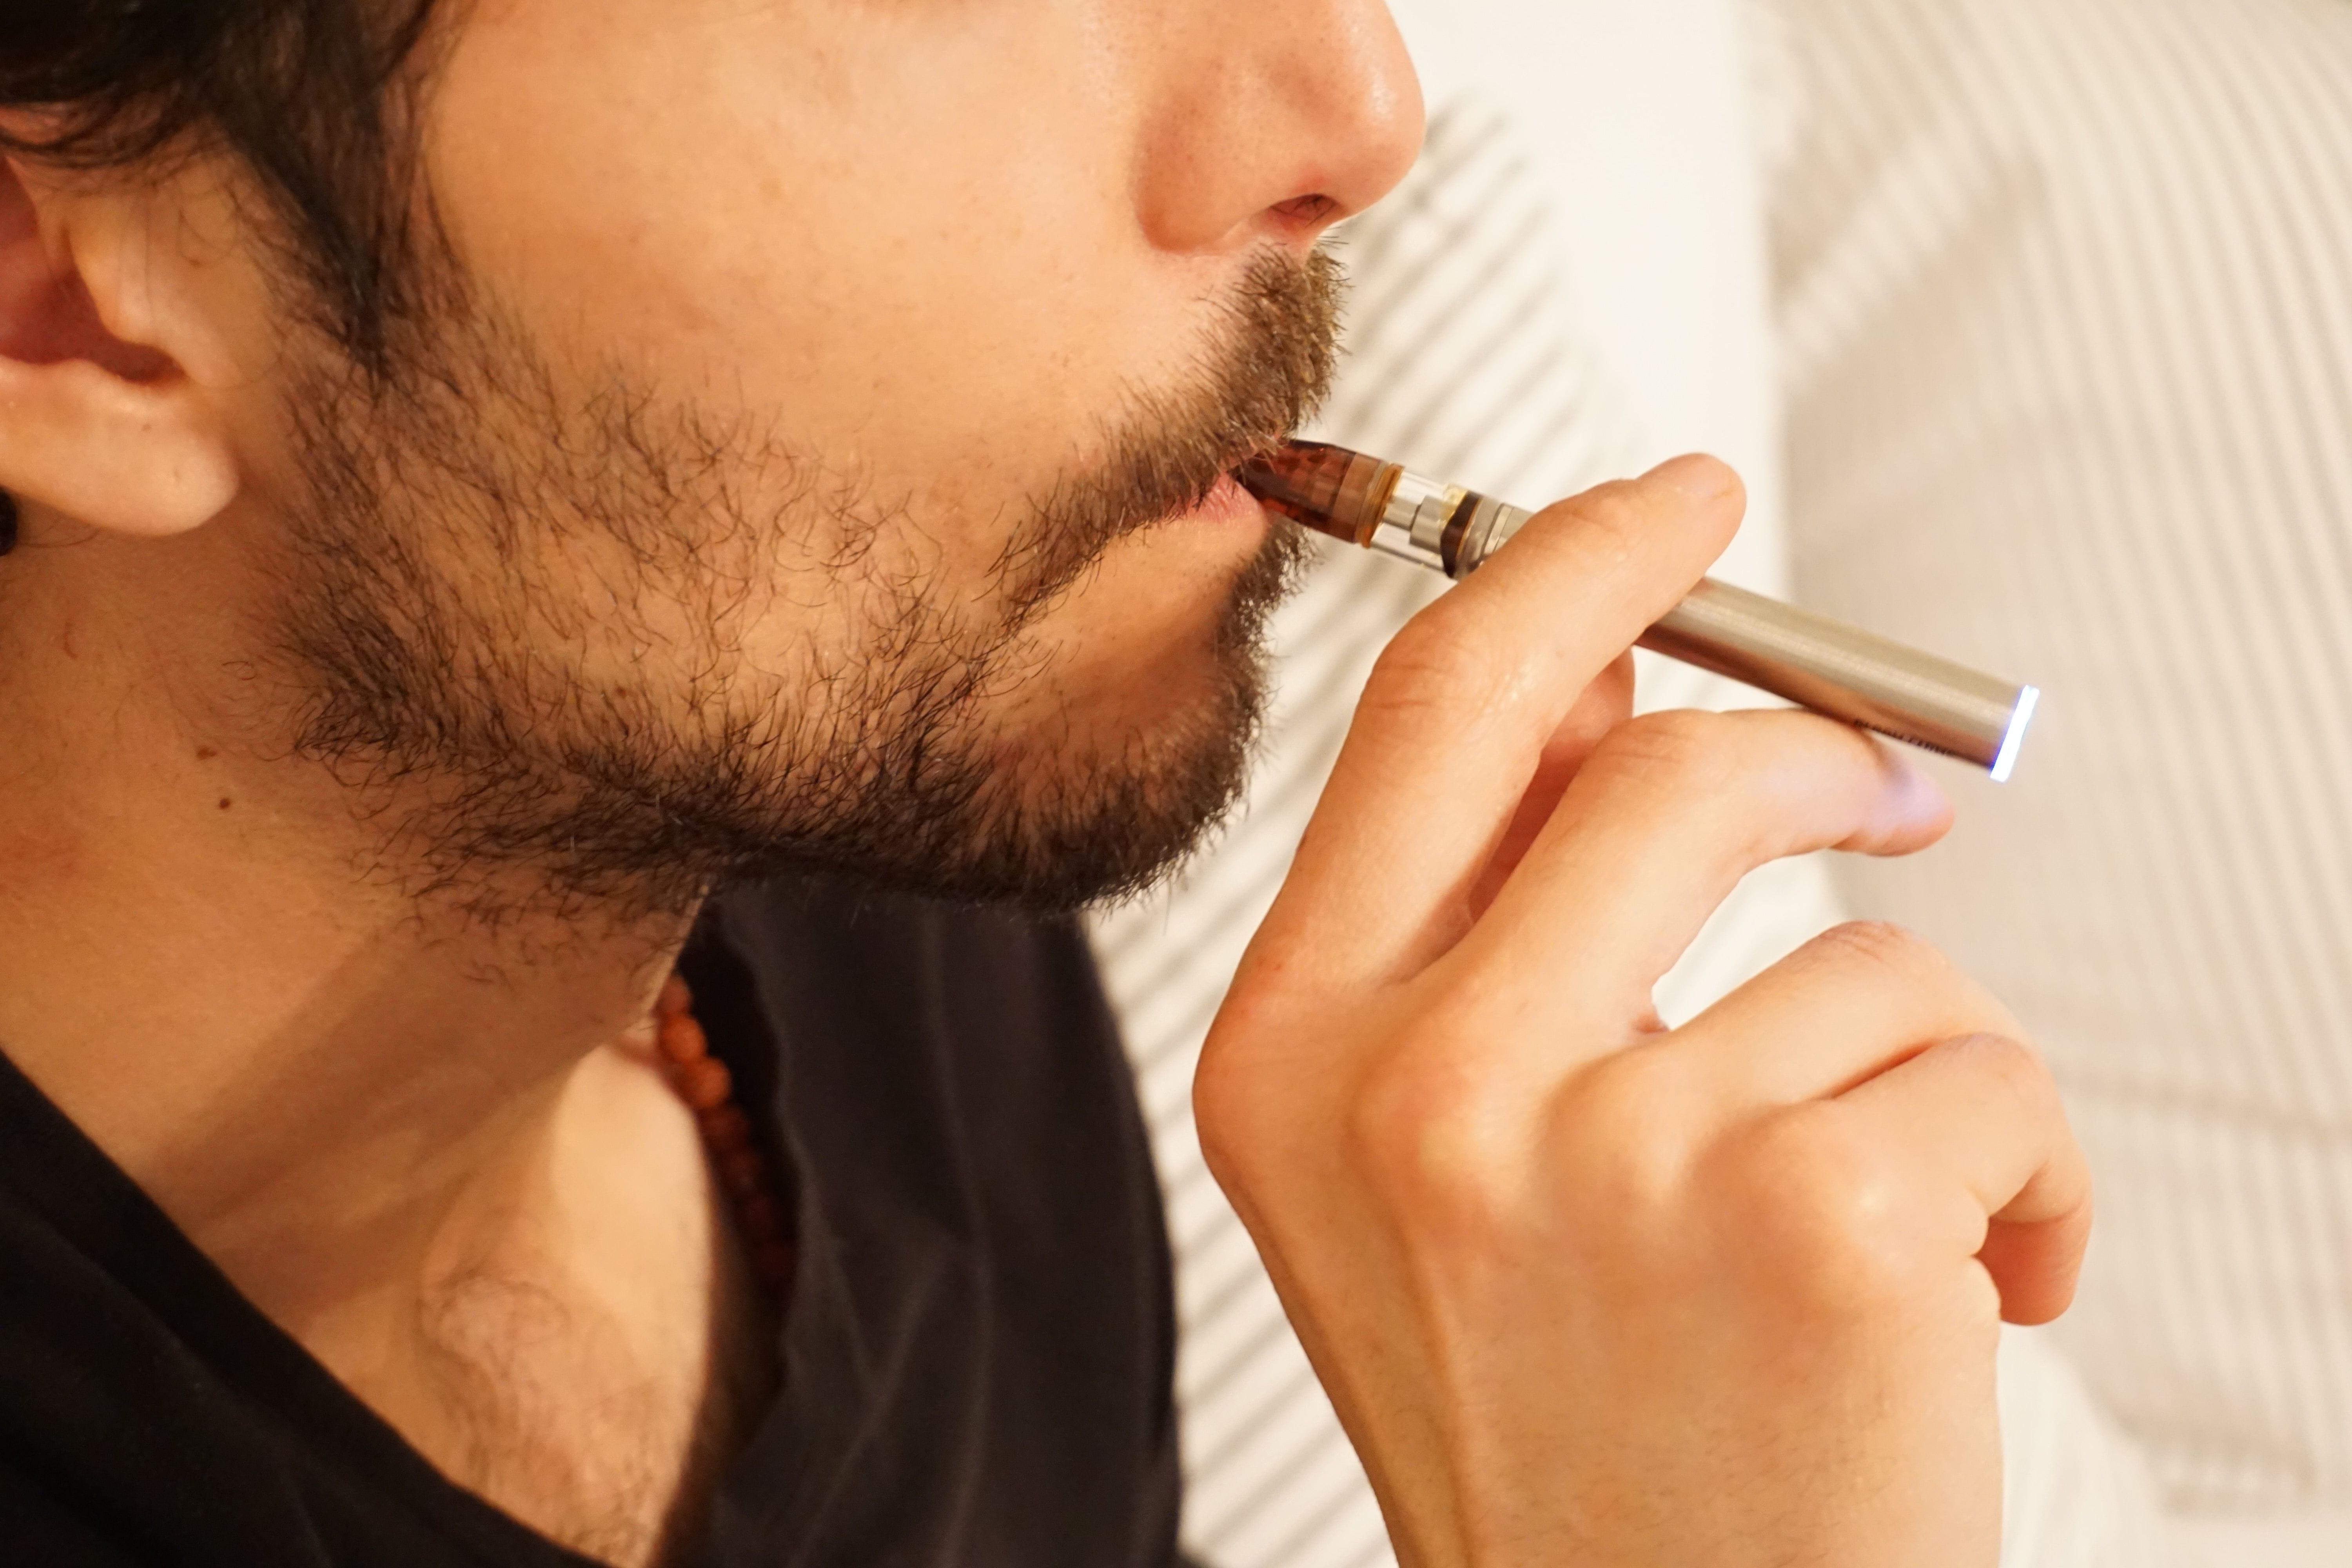 Vaping negatively affects heart health and cancer